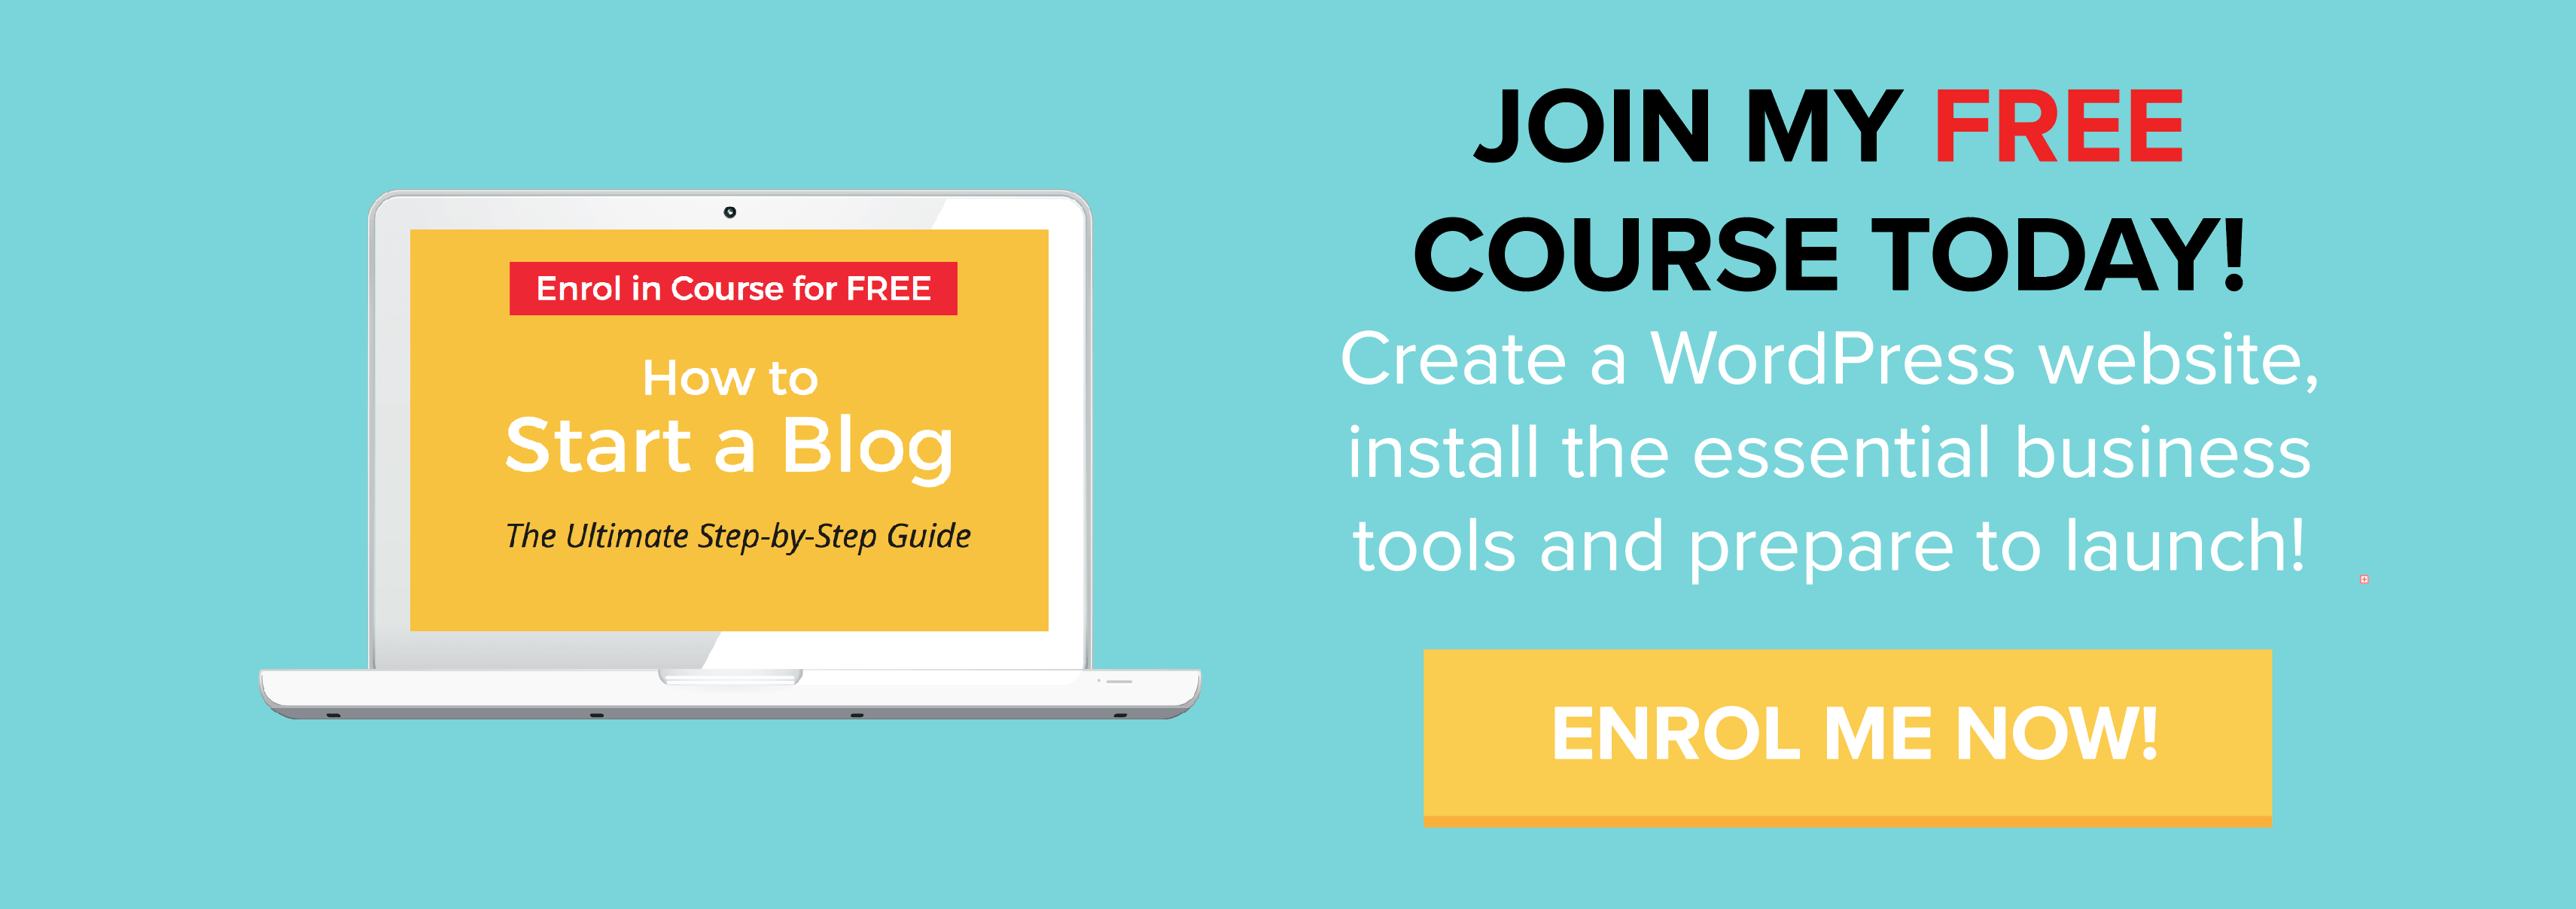 Enrol in my free course